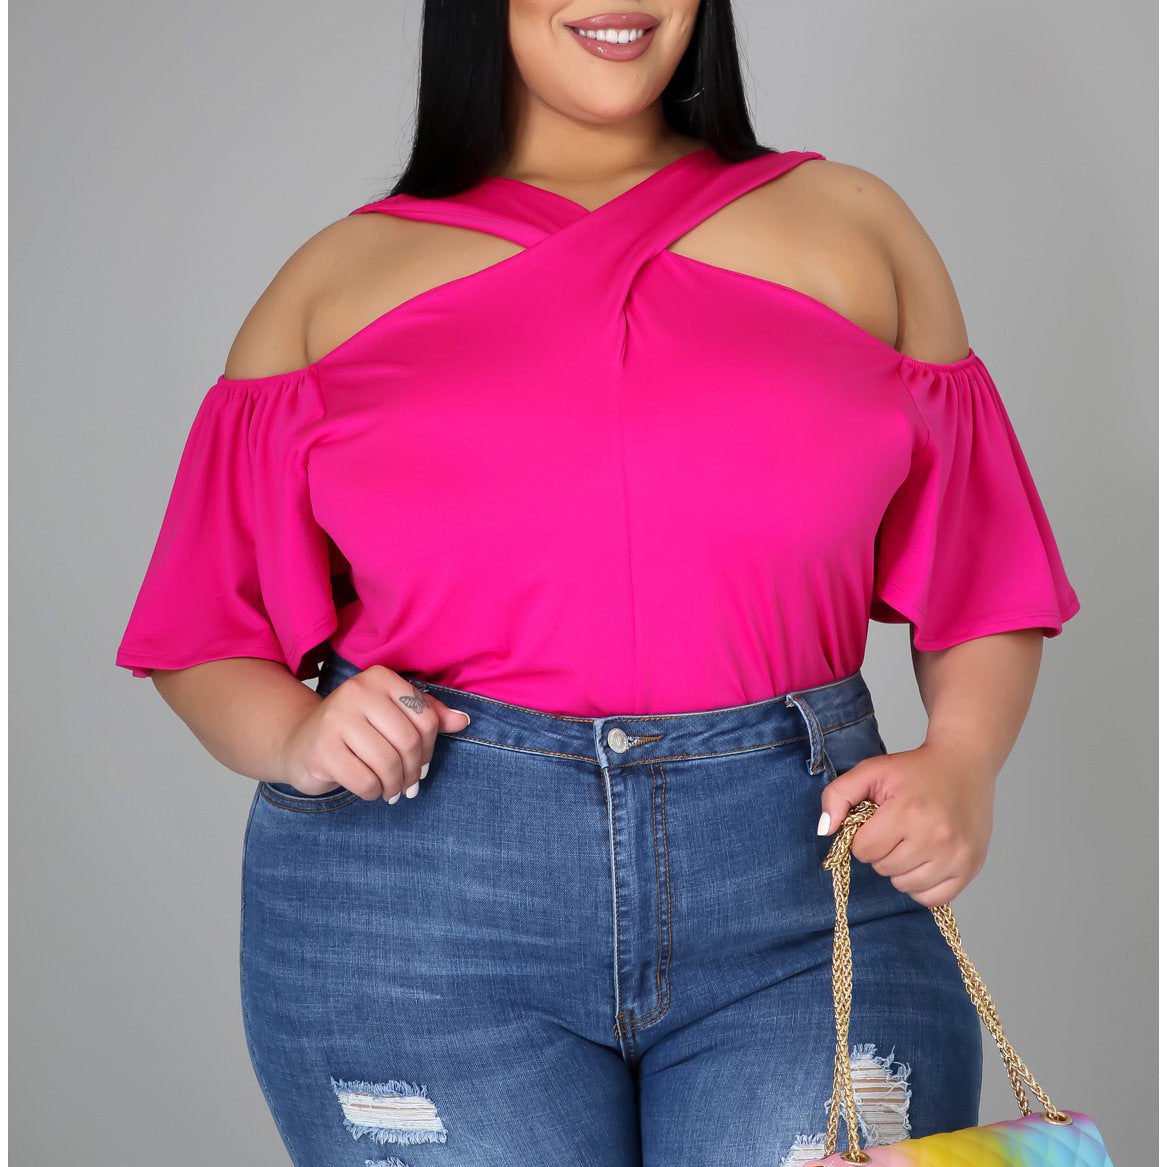 Plus Size Women Clothes Criss Cross Collar off-Shoulder Solid Color Casual Loose Short Sleeve T-shirt